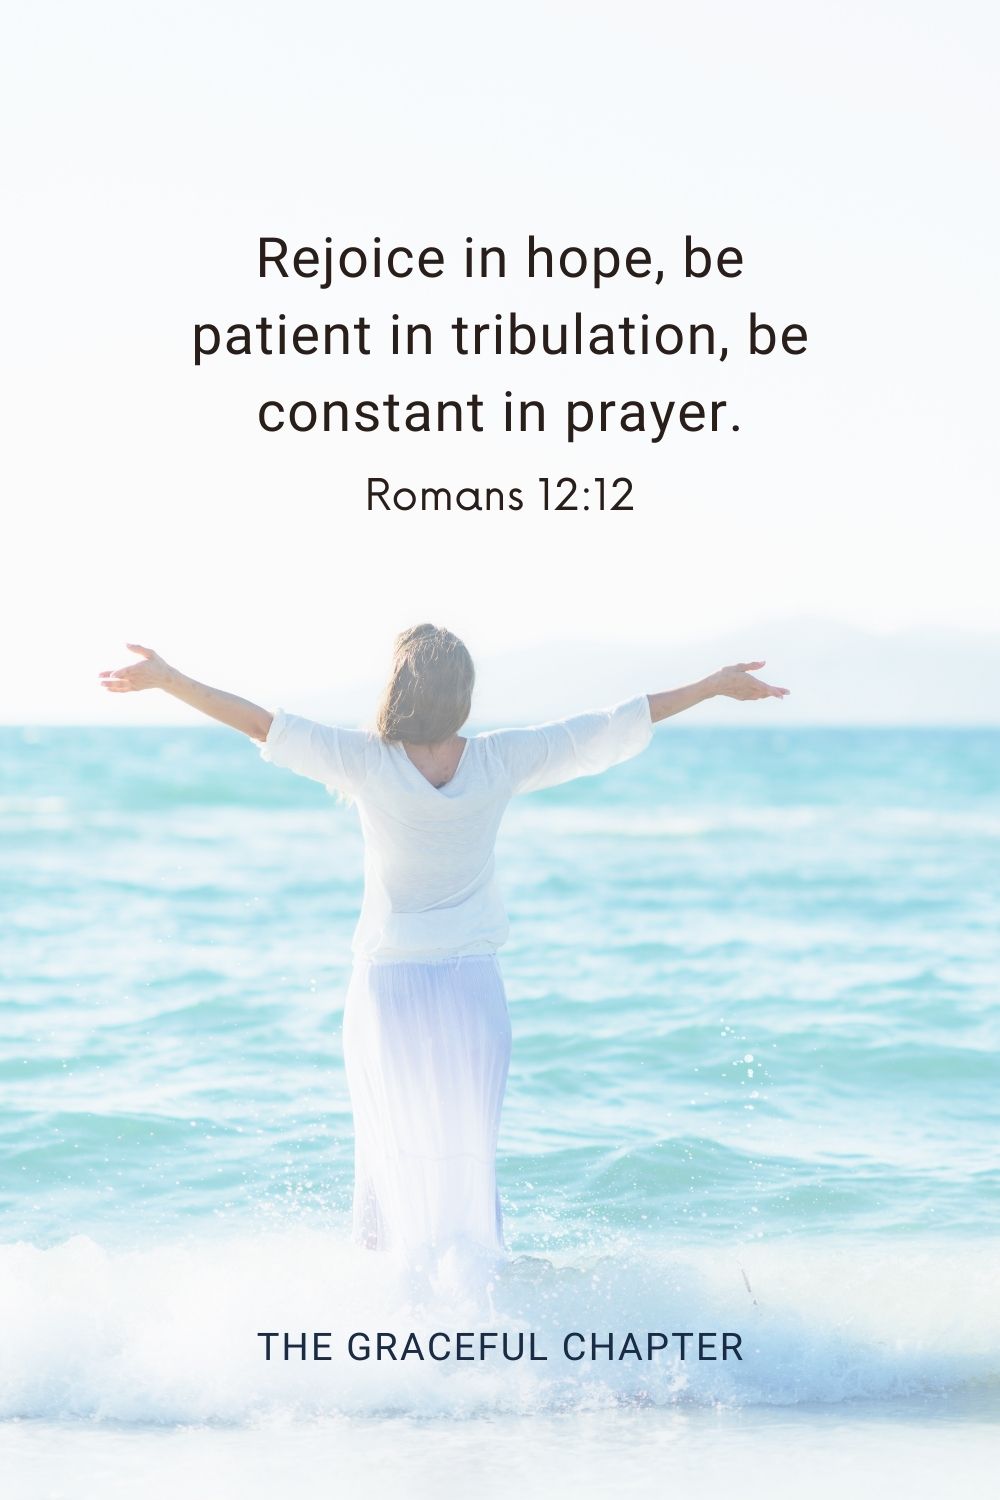 Rejoice in hope, be patient in tribulation, be constant in prayer. Romans 12:12